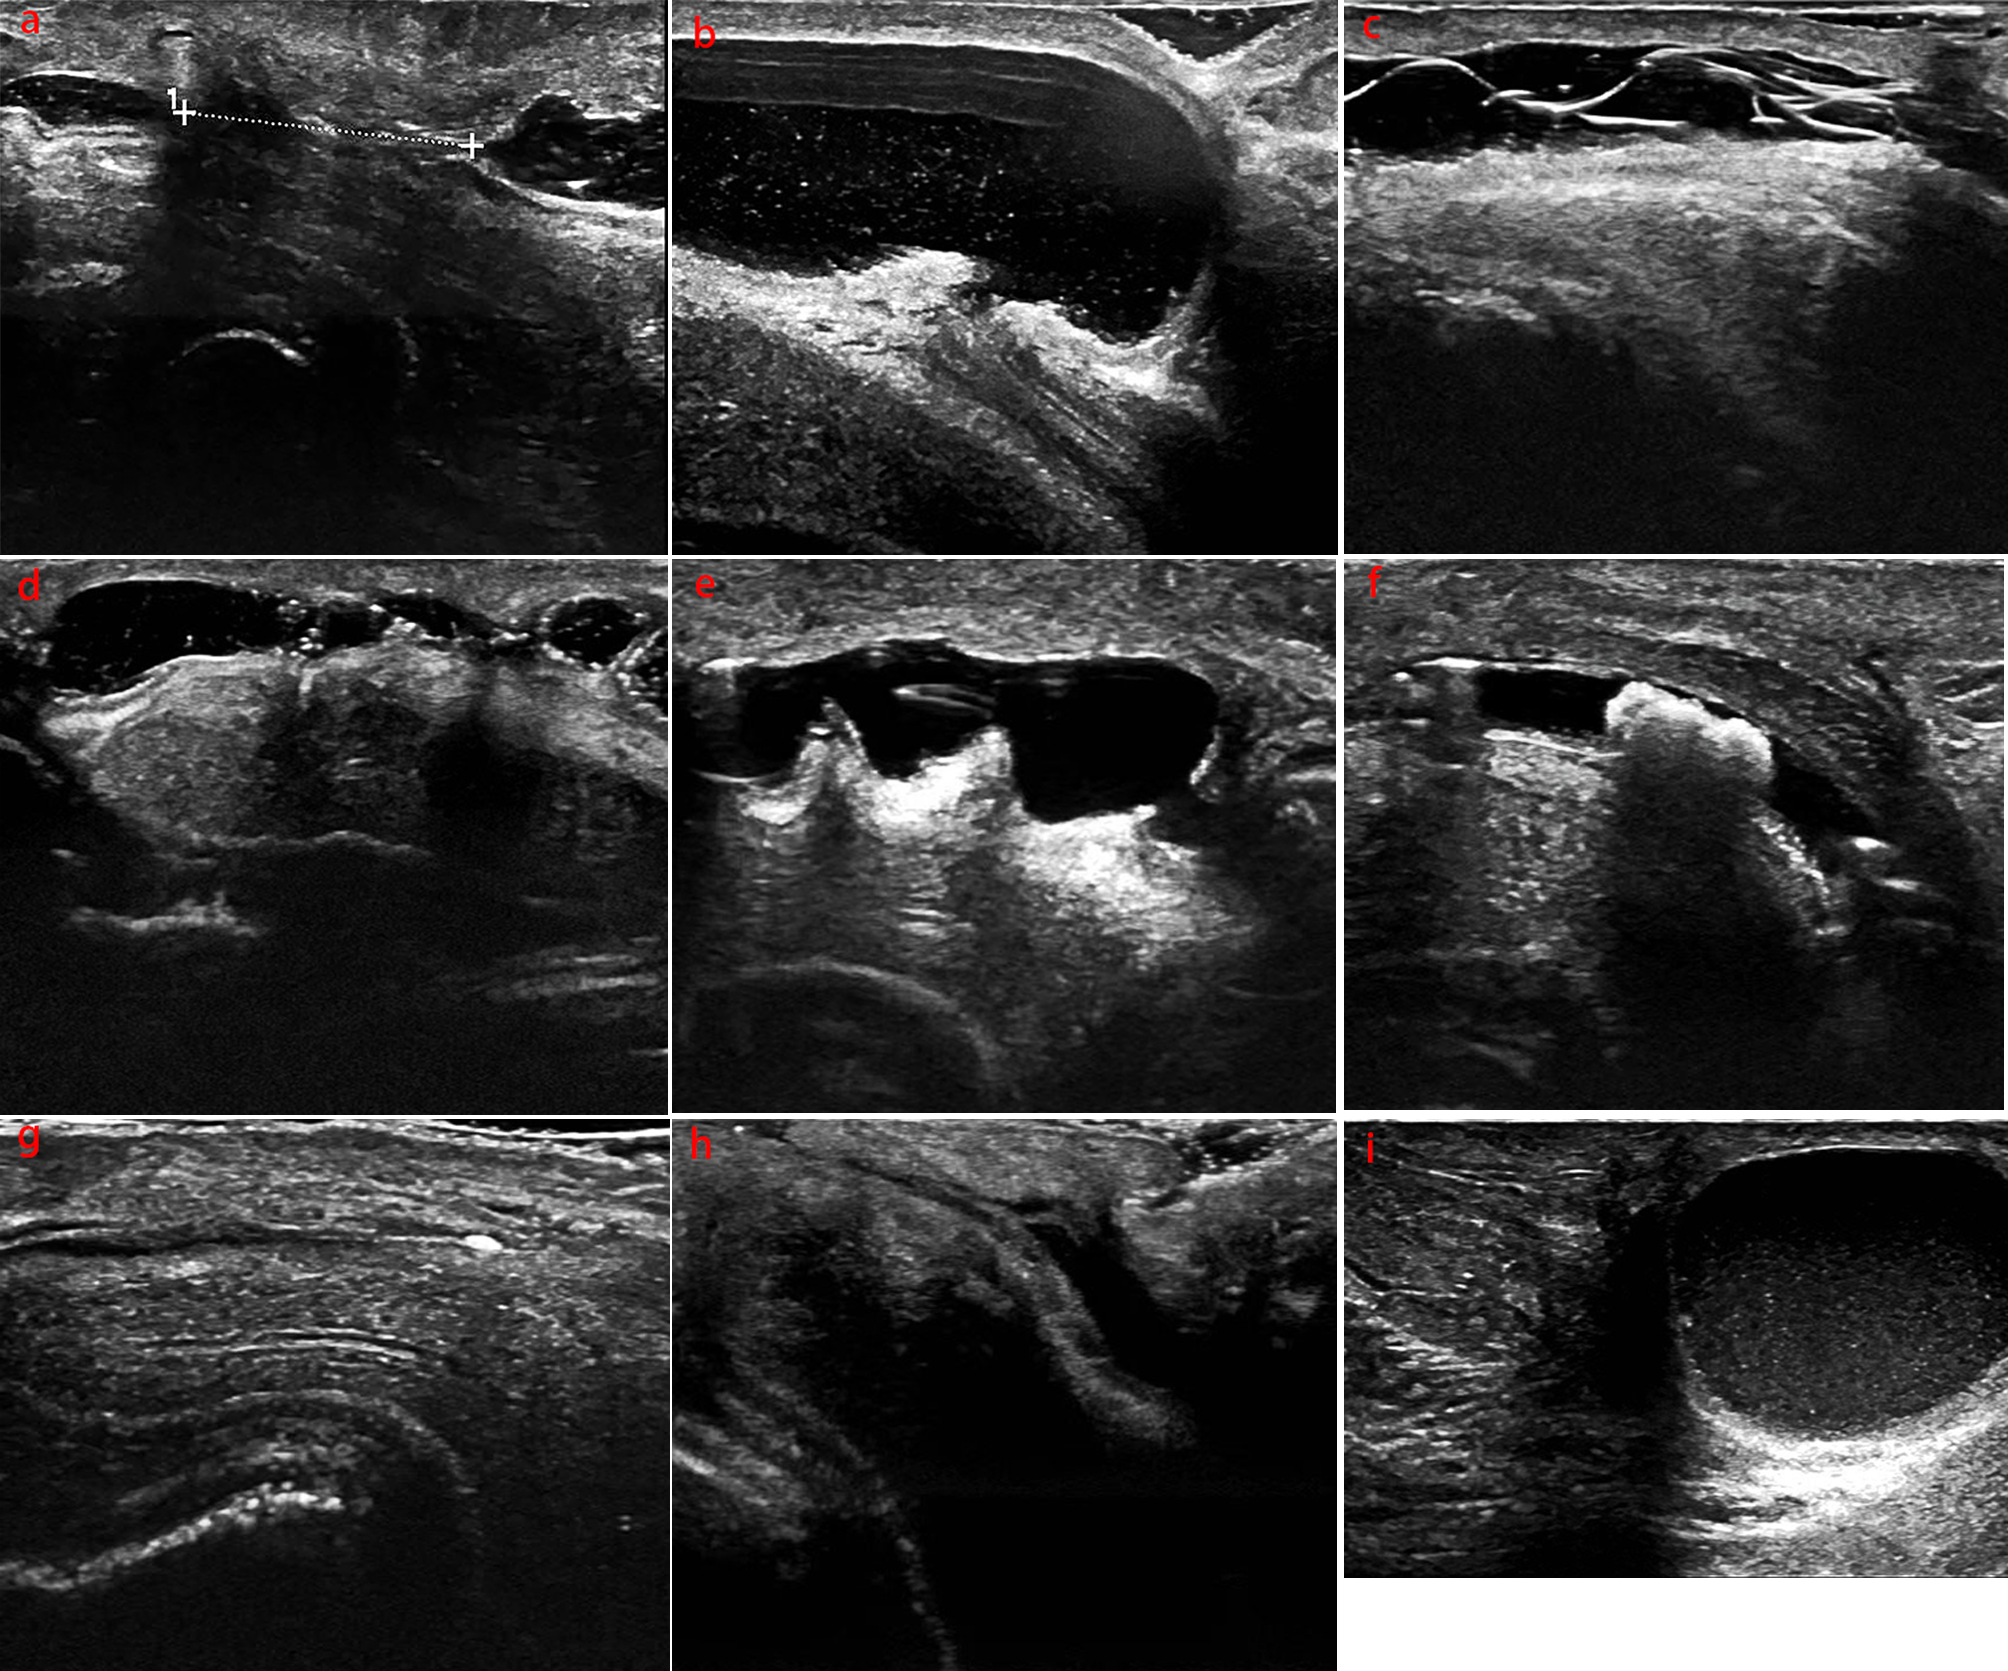 Evaluation of postoperative complications of hypospadias using high-frequency ultrasound imaging